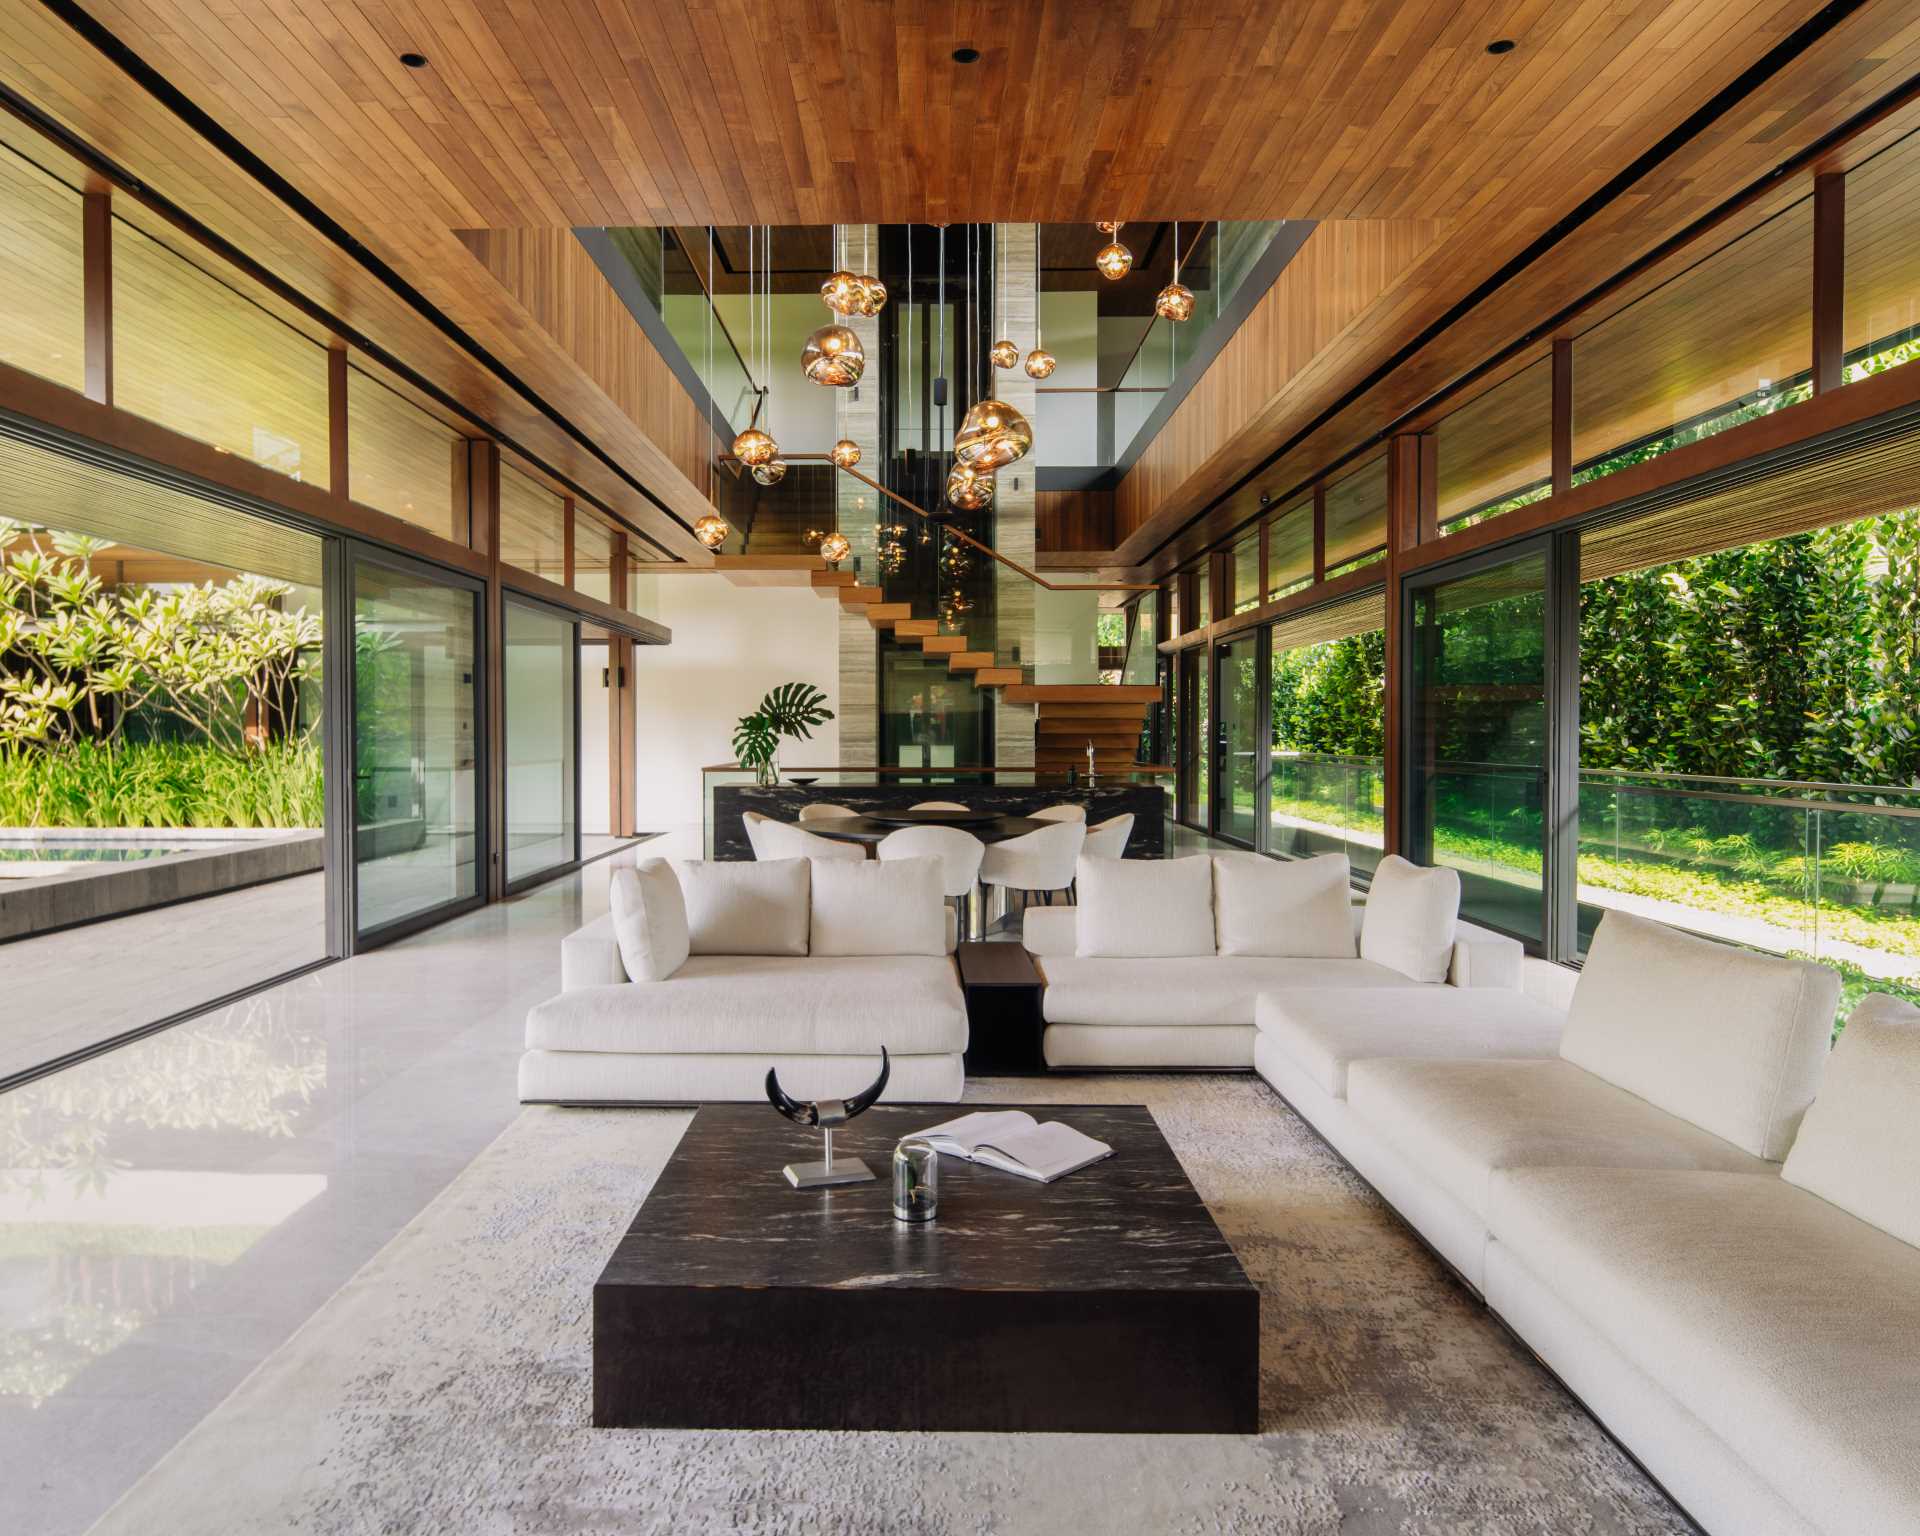 A modern open-plan living room and dining area with high wood ceilings and sliding gl، doors that connect with the outdoor ،es.